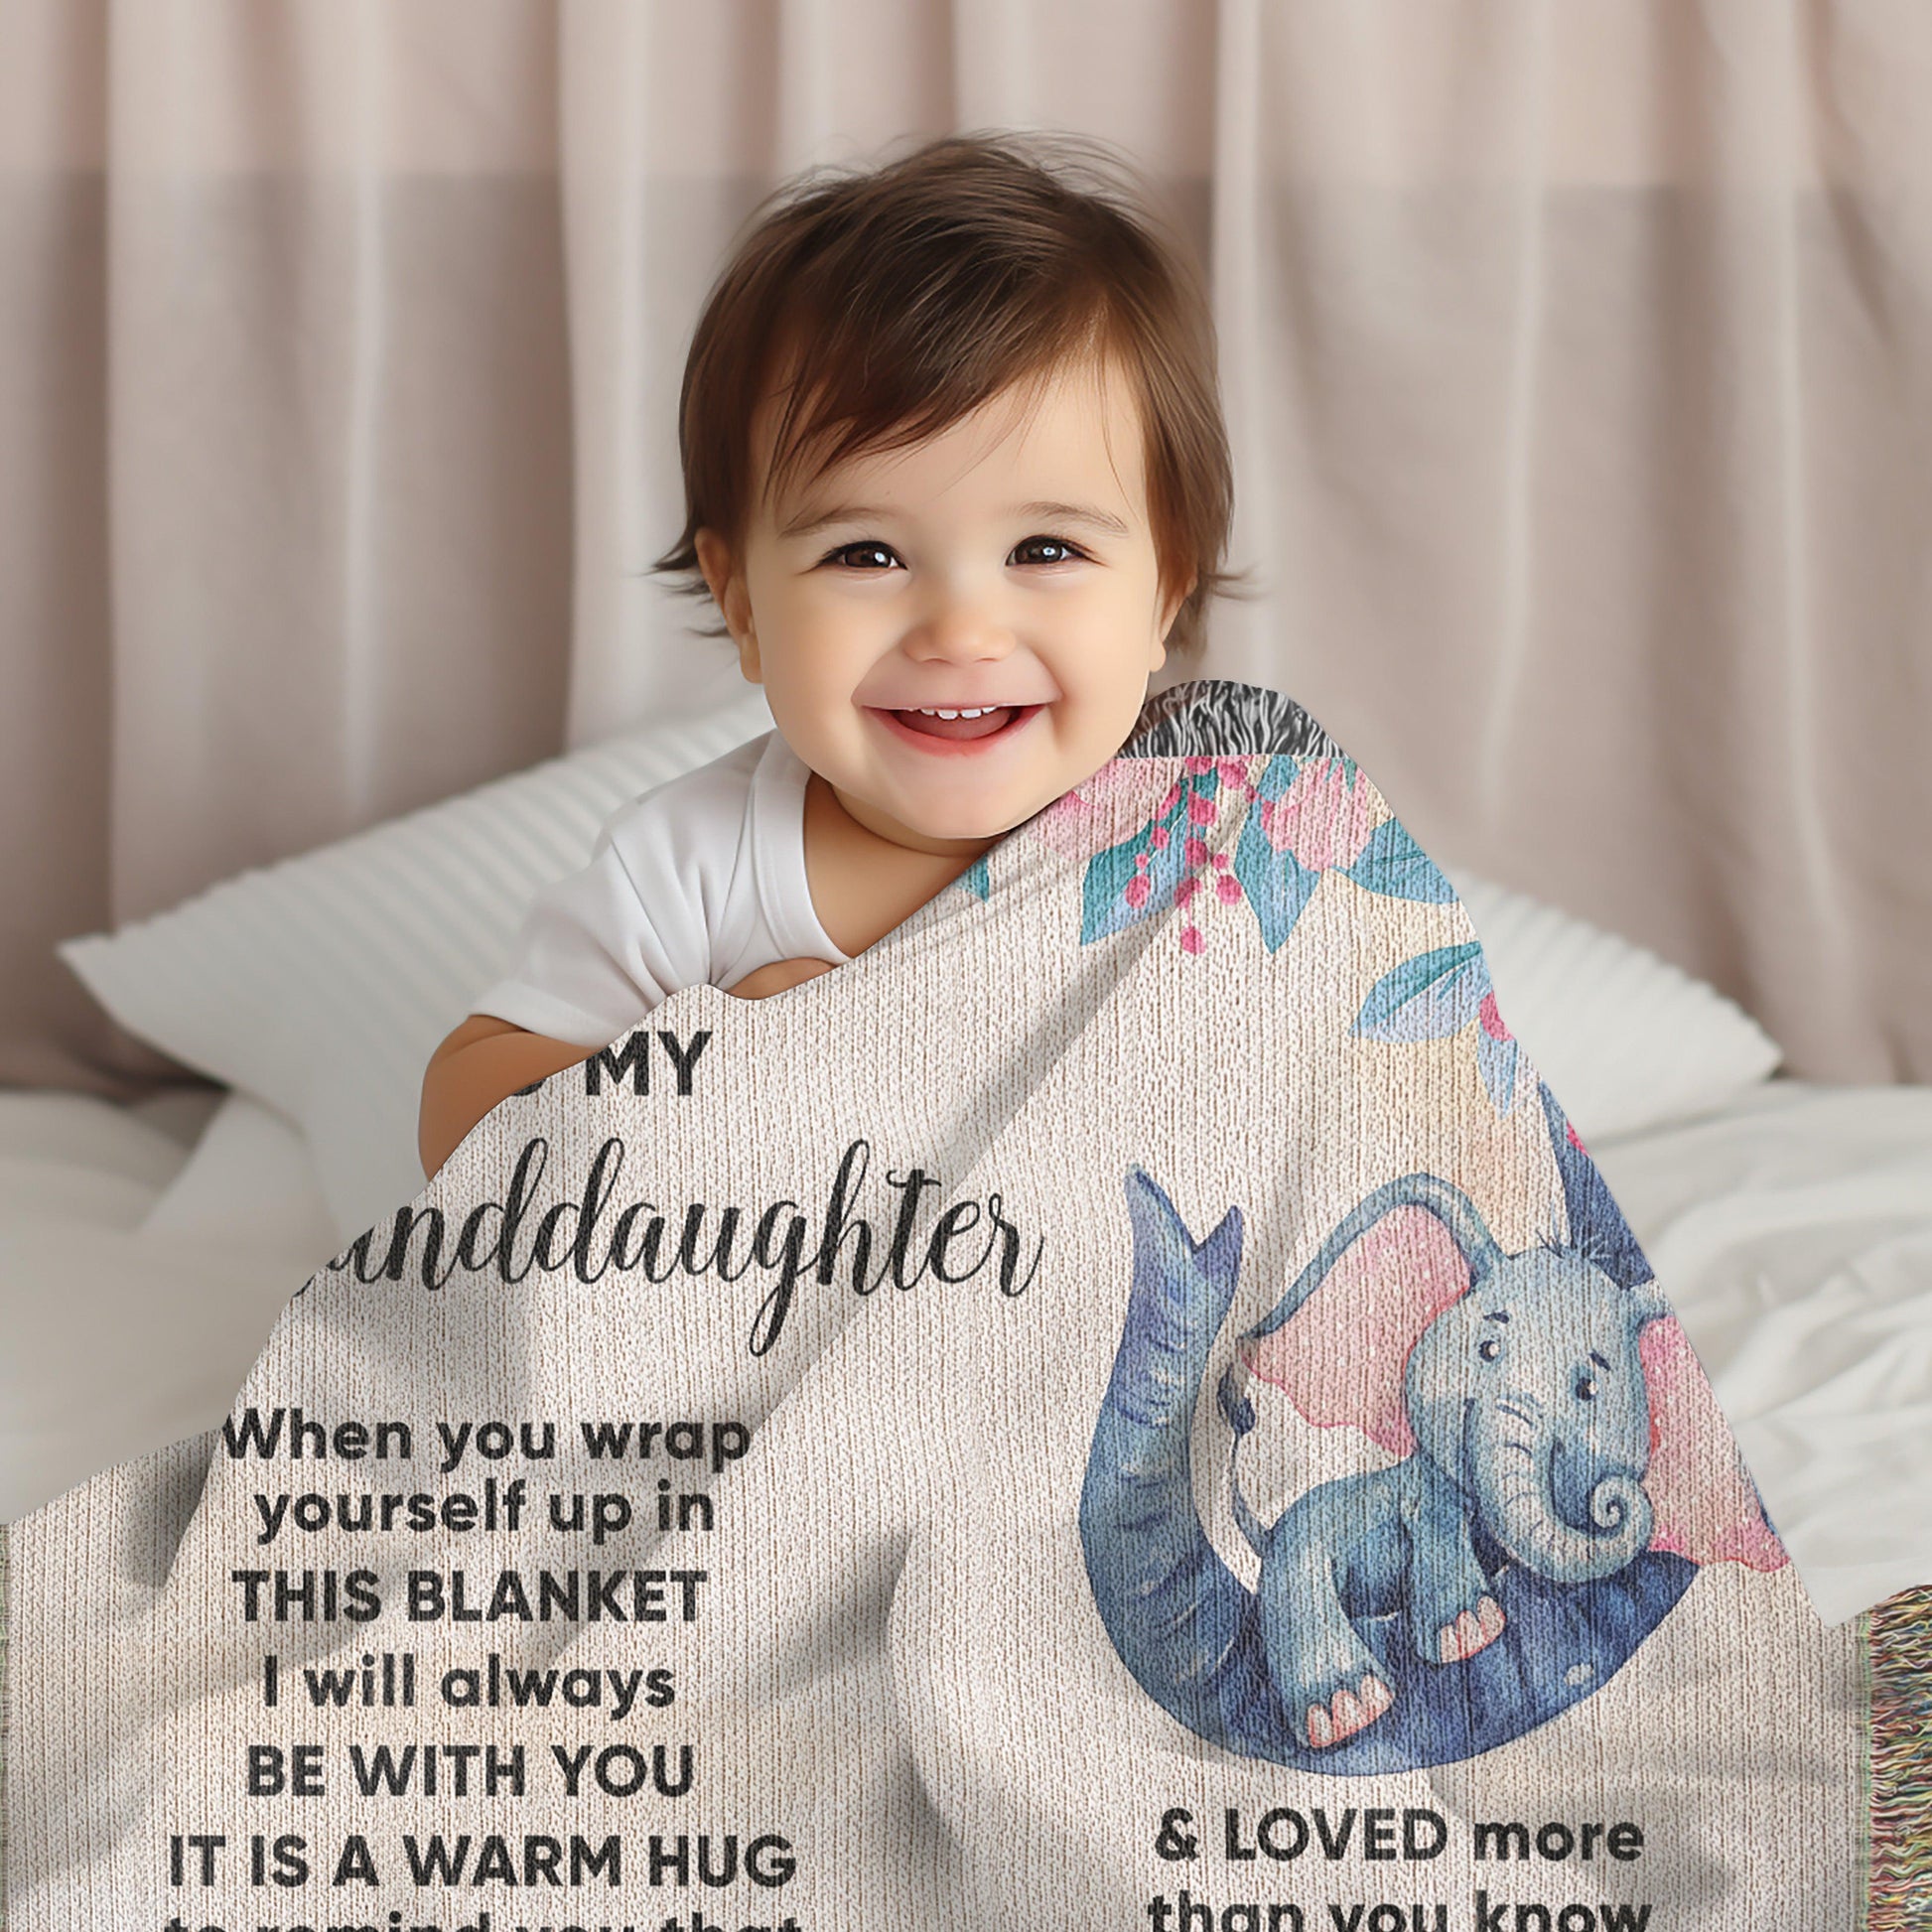 To My Granddaughter You are Braver than you Believe and Loved More Than You Know Heirloom Woven Blanket - Mallard Moon Gift Shop